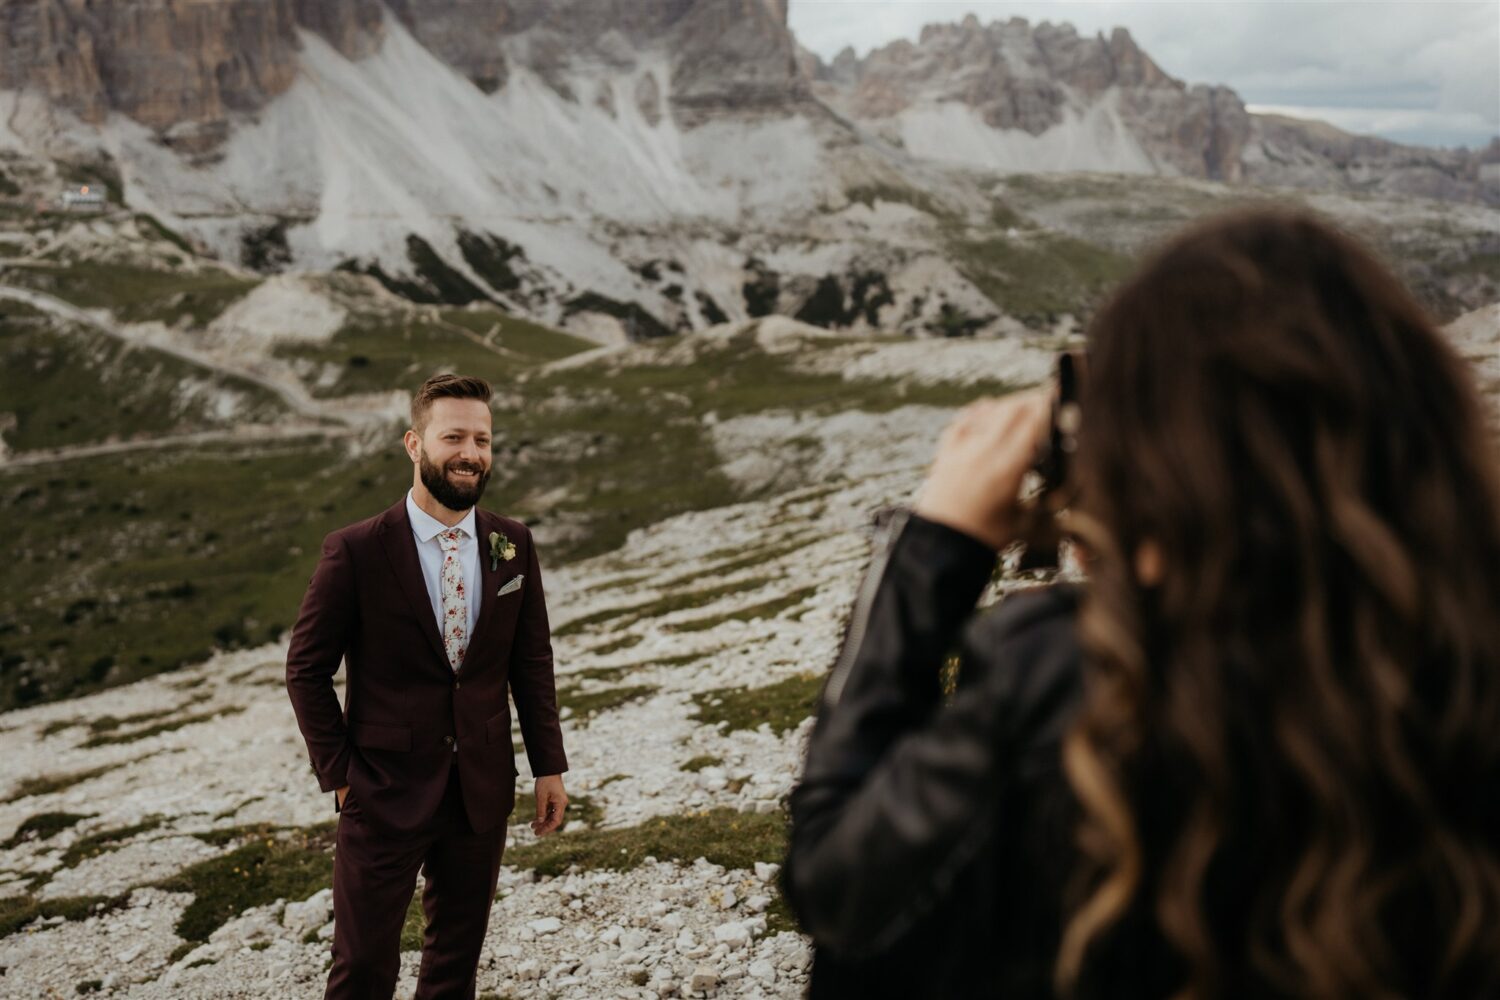 photographer takes photos of groom at mountaintop elopement